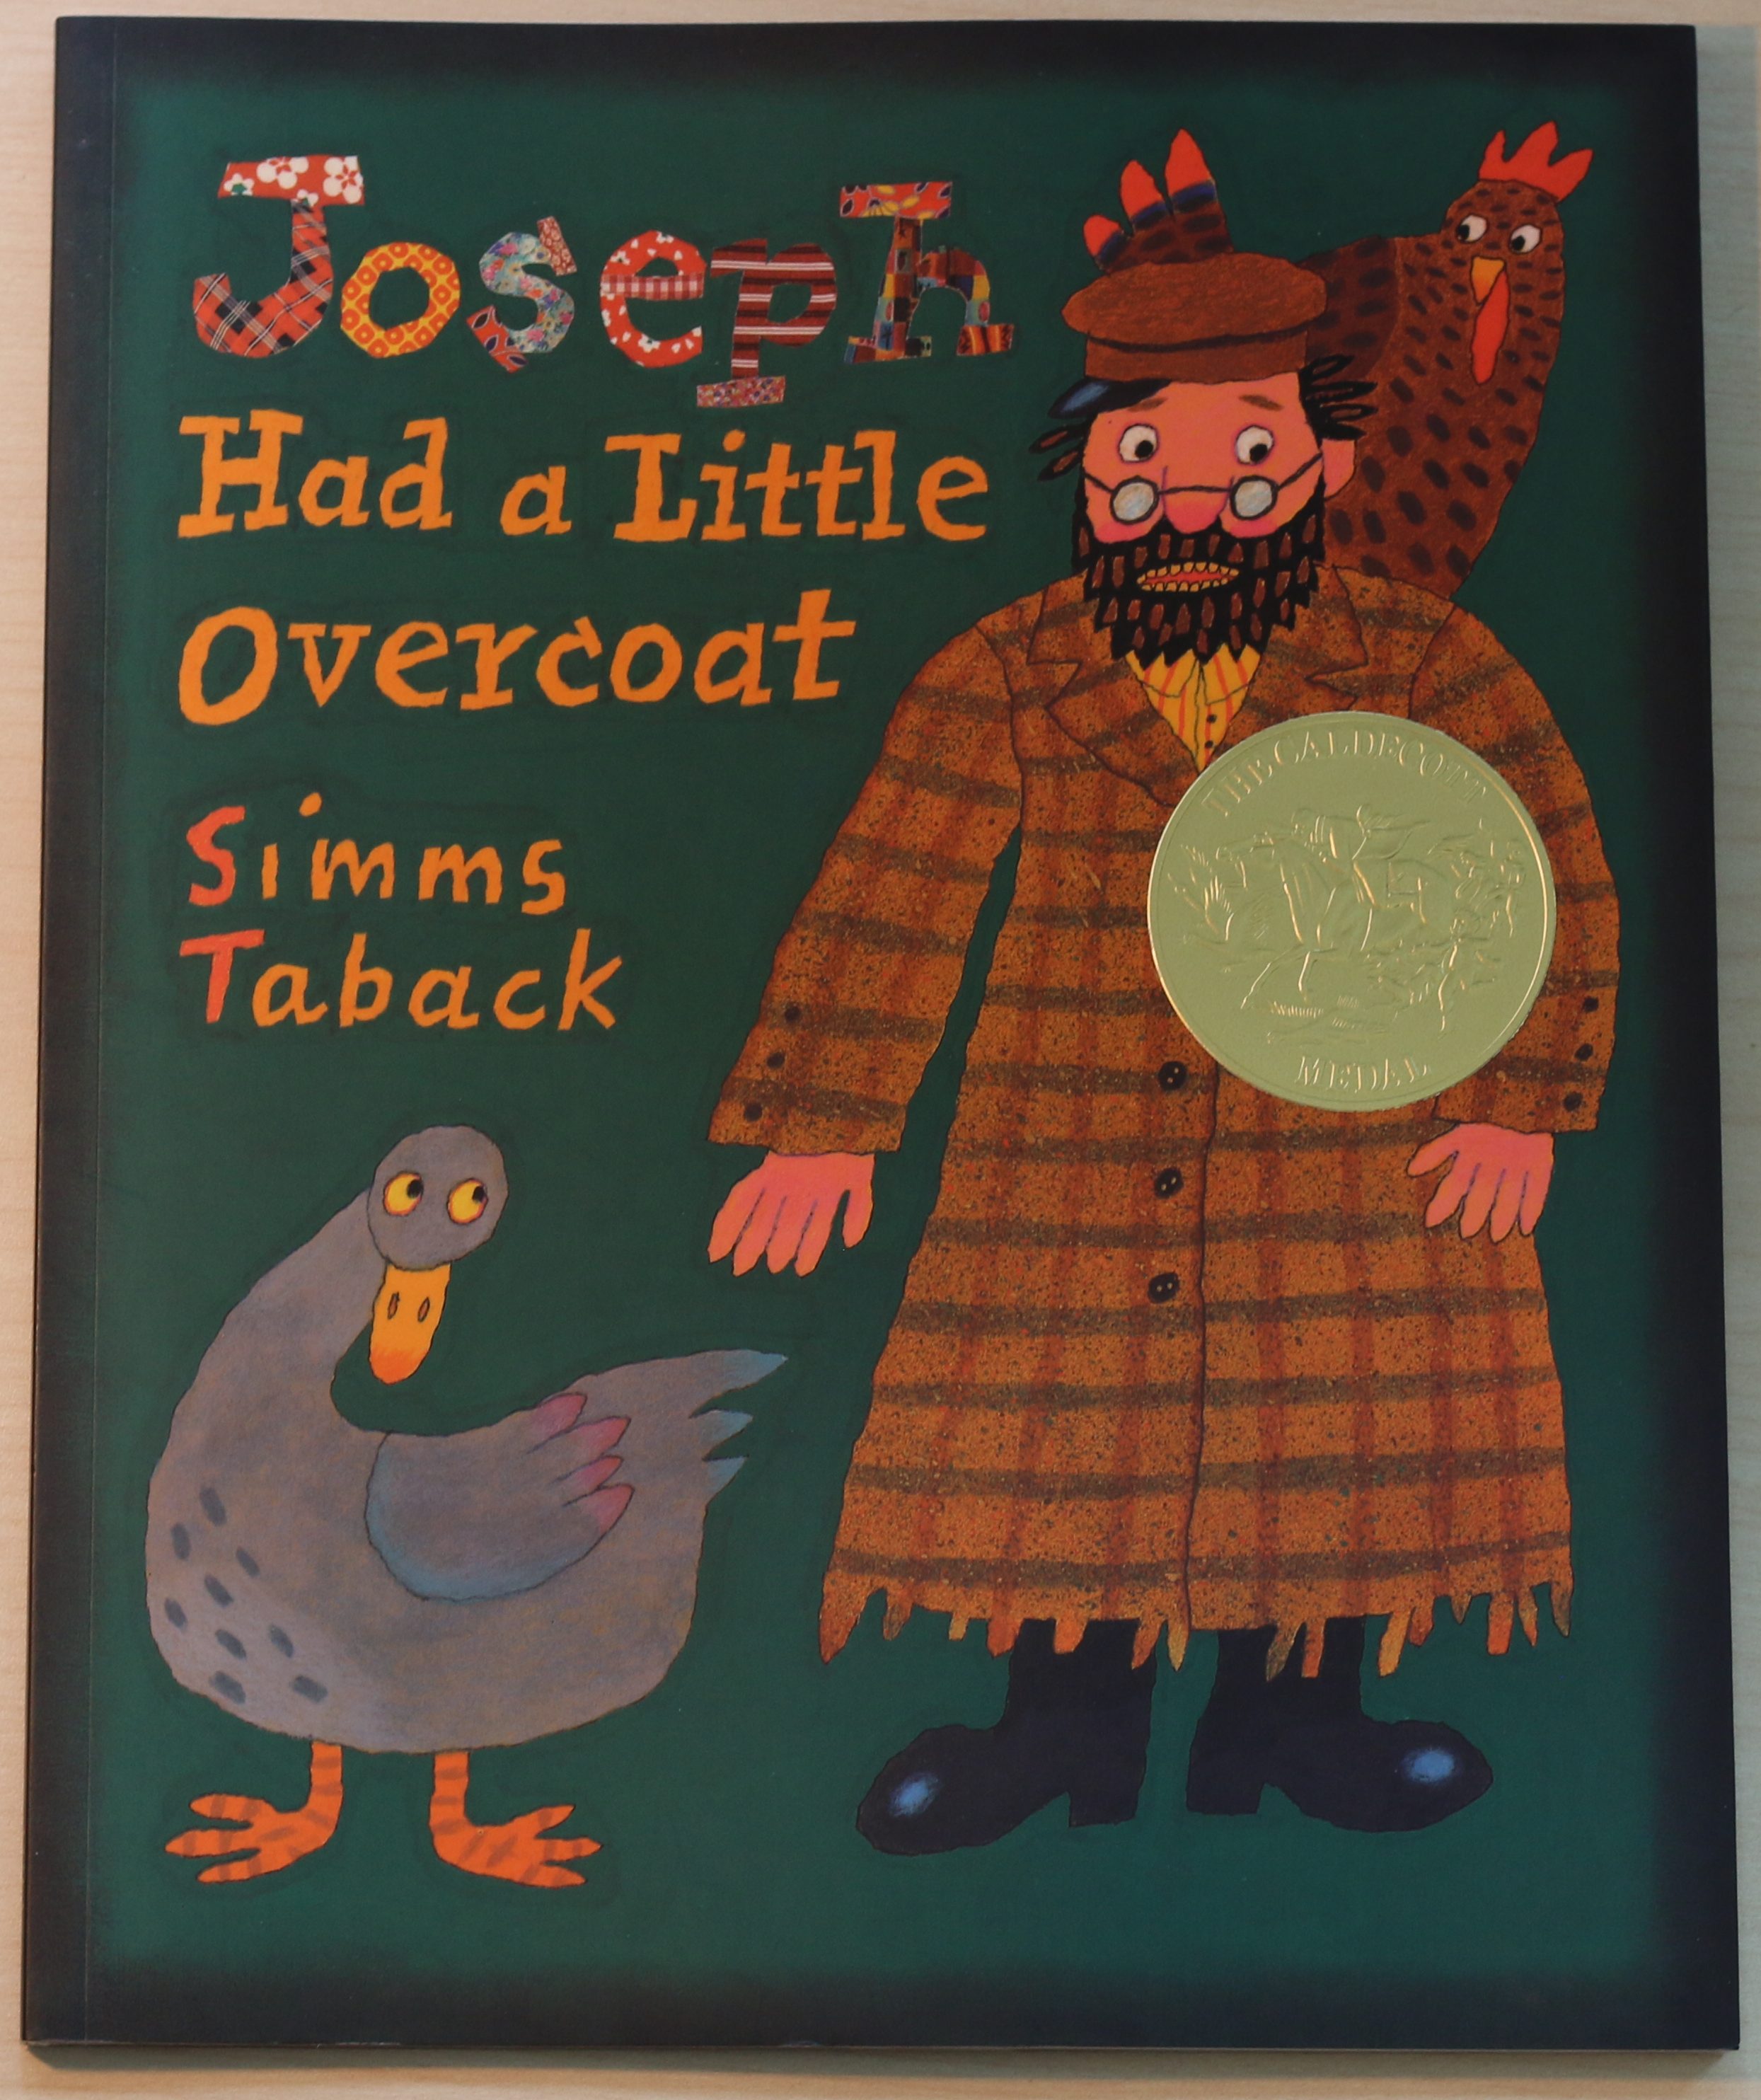 Storytime in the Square: Joseph Had a Little Overcoat - 14th Street Y